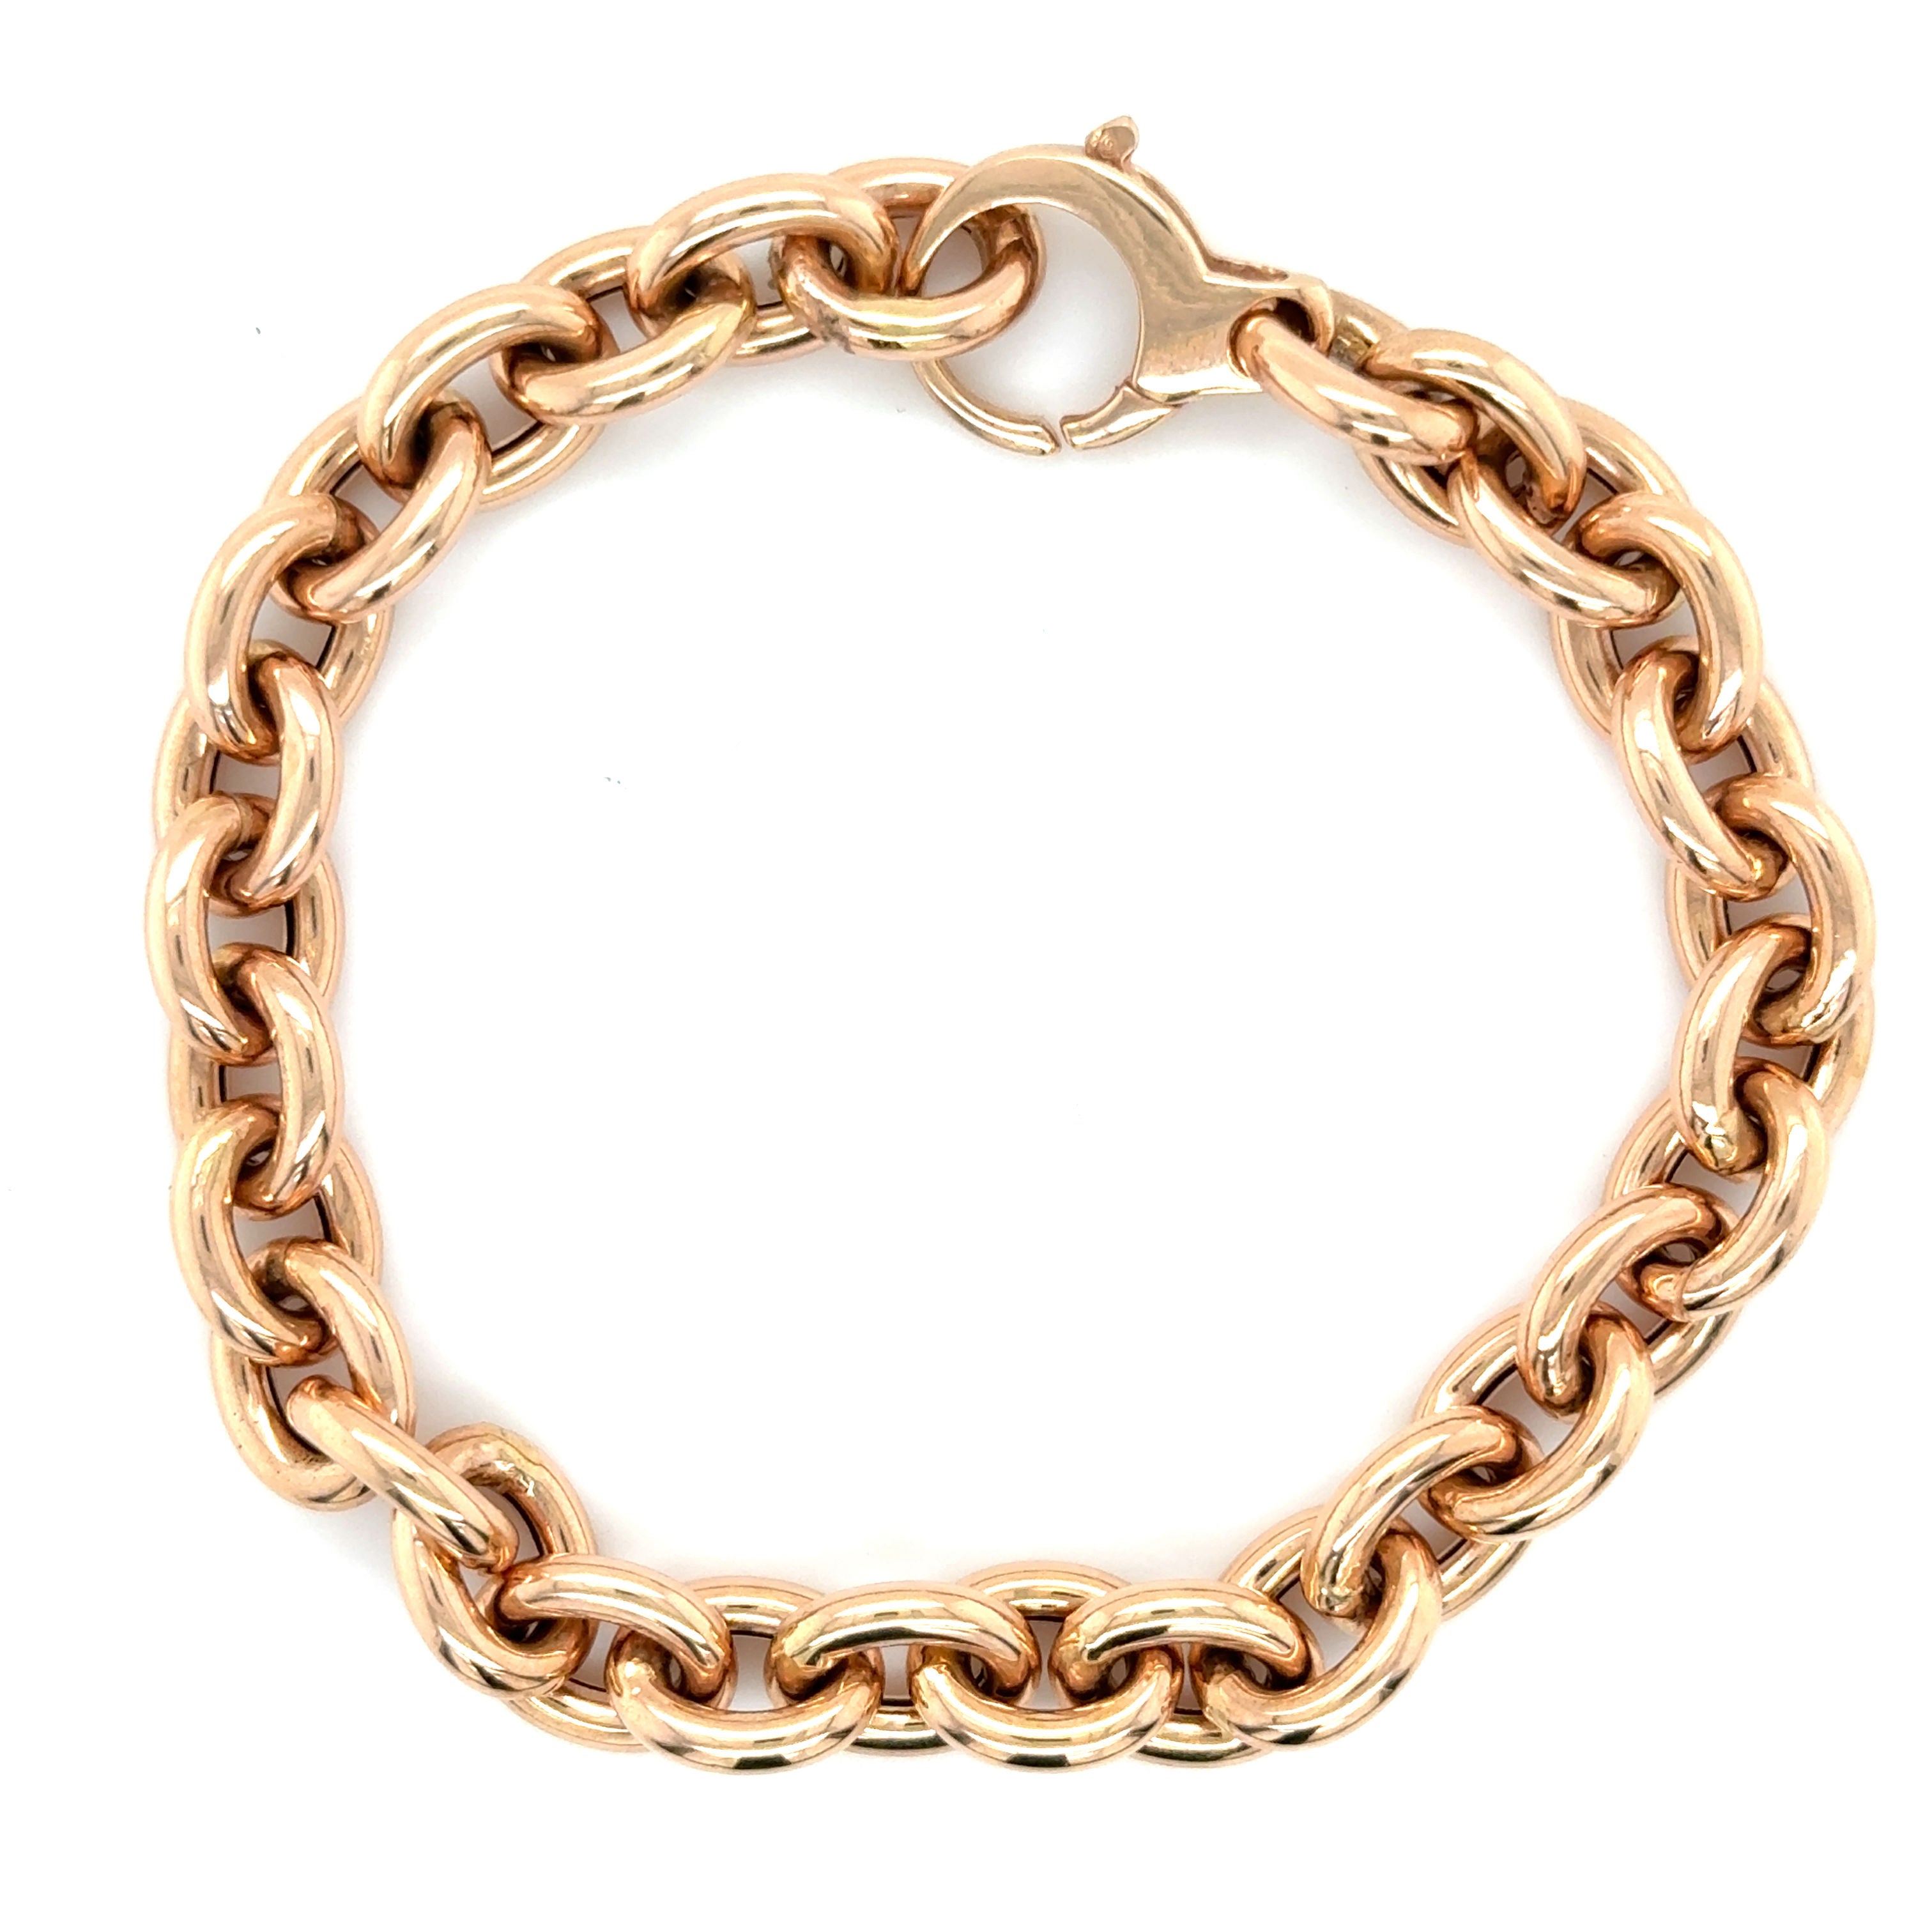 14K ROSE GOLD THICK ROLO LINK CHAIN BRACELET